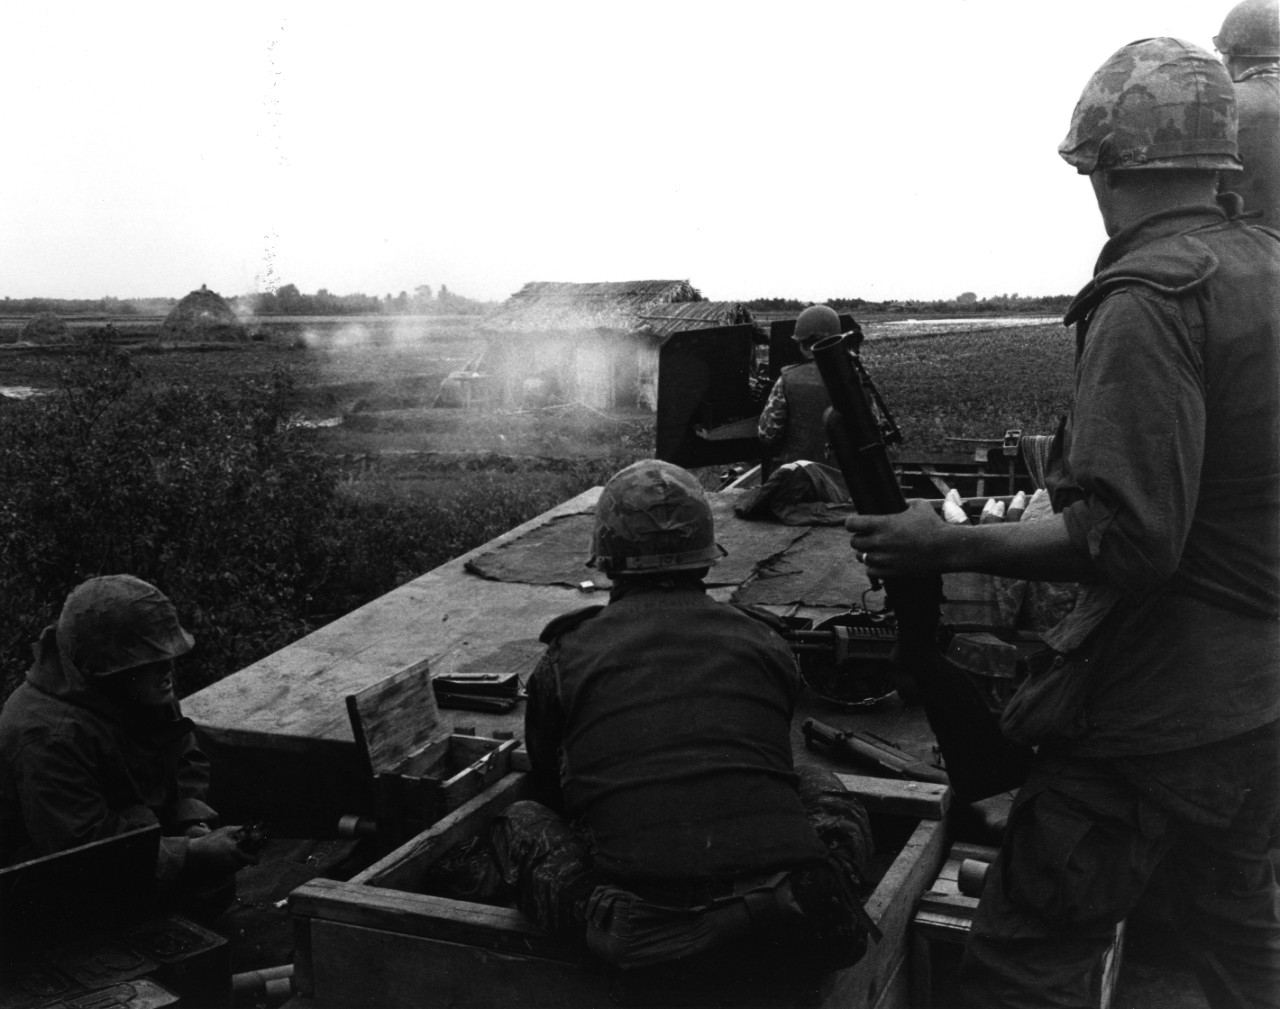 Members of a U.S. Navy SEAL Team aboard a mechanized landing craft fire on Viet Cong huts during a special Vietnamese-American operation in the Rung Sat Special Zone, Friday, 20 January 1967, approximately 15 miles south-southeast of Saigon.